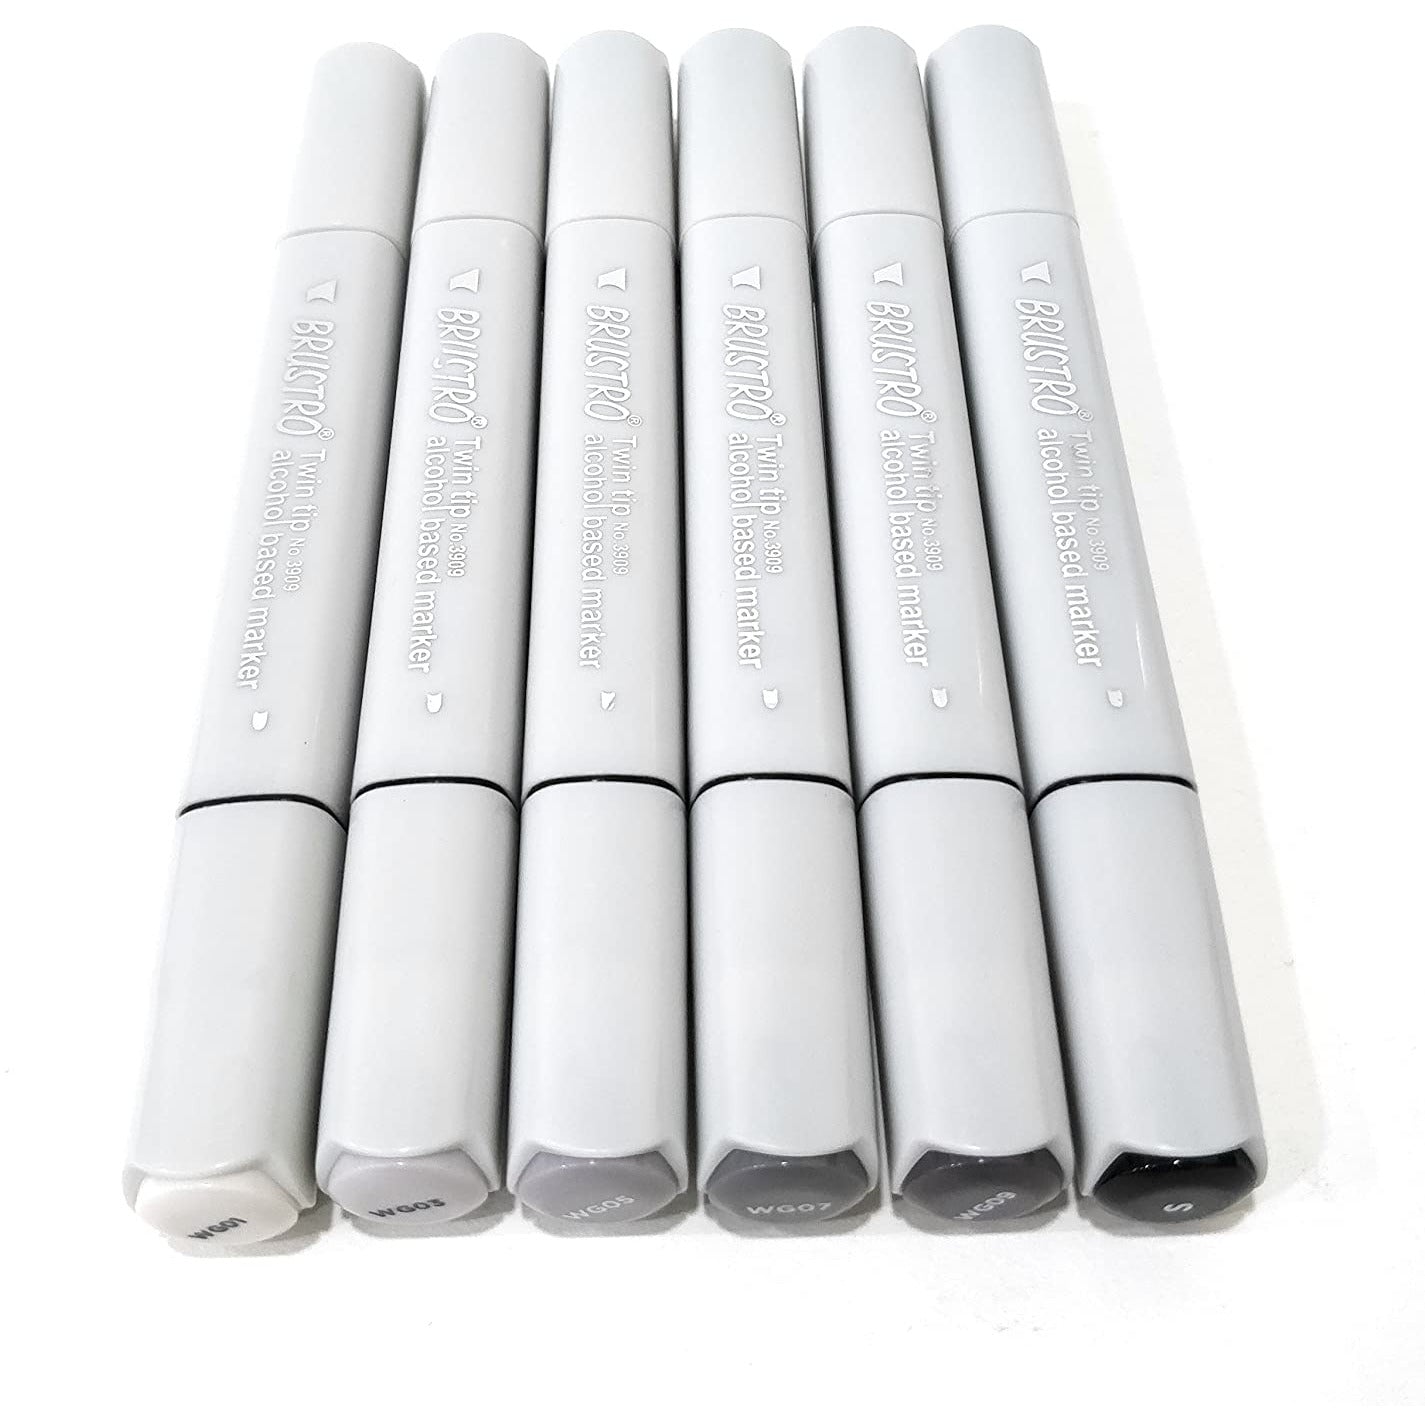 BRUSTRO ALCOHOL MARKER TWIN TIP WARM GRAY-B SET OF 6